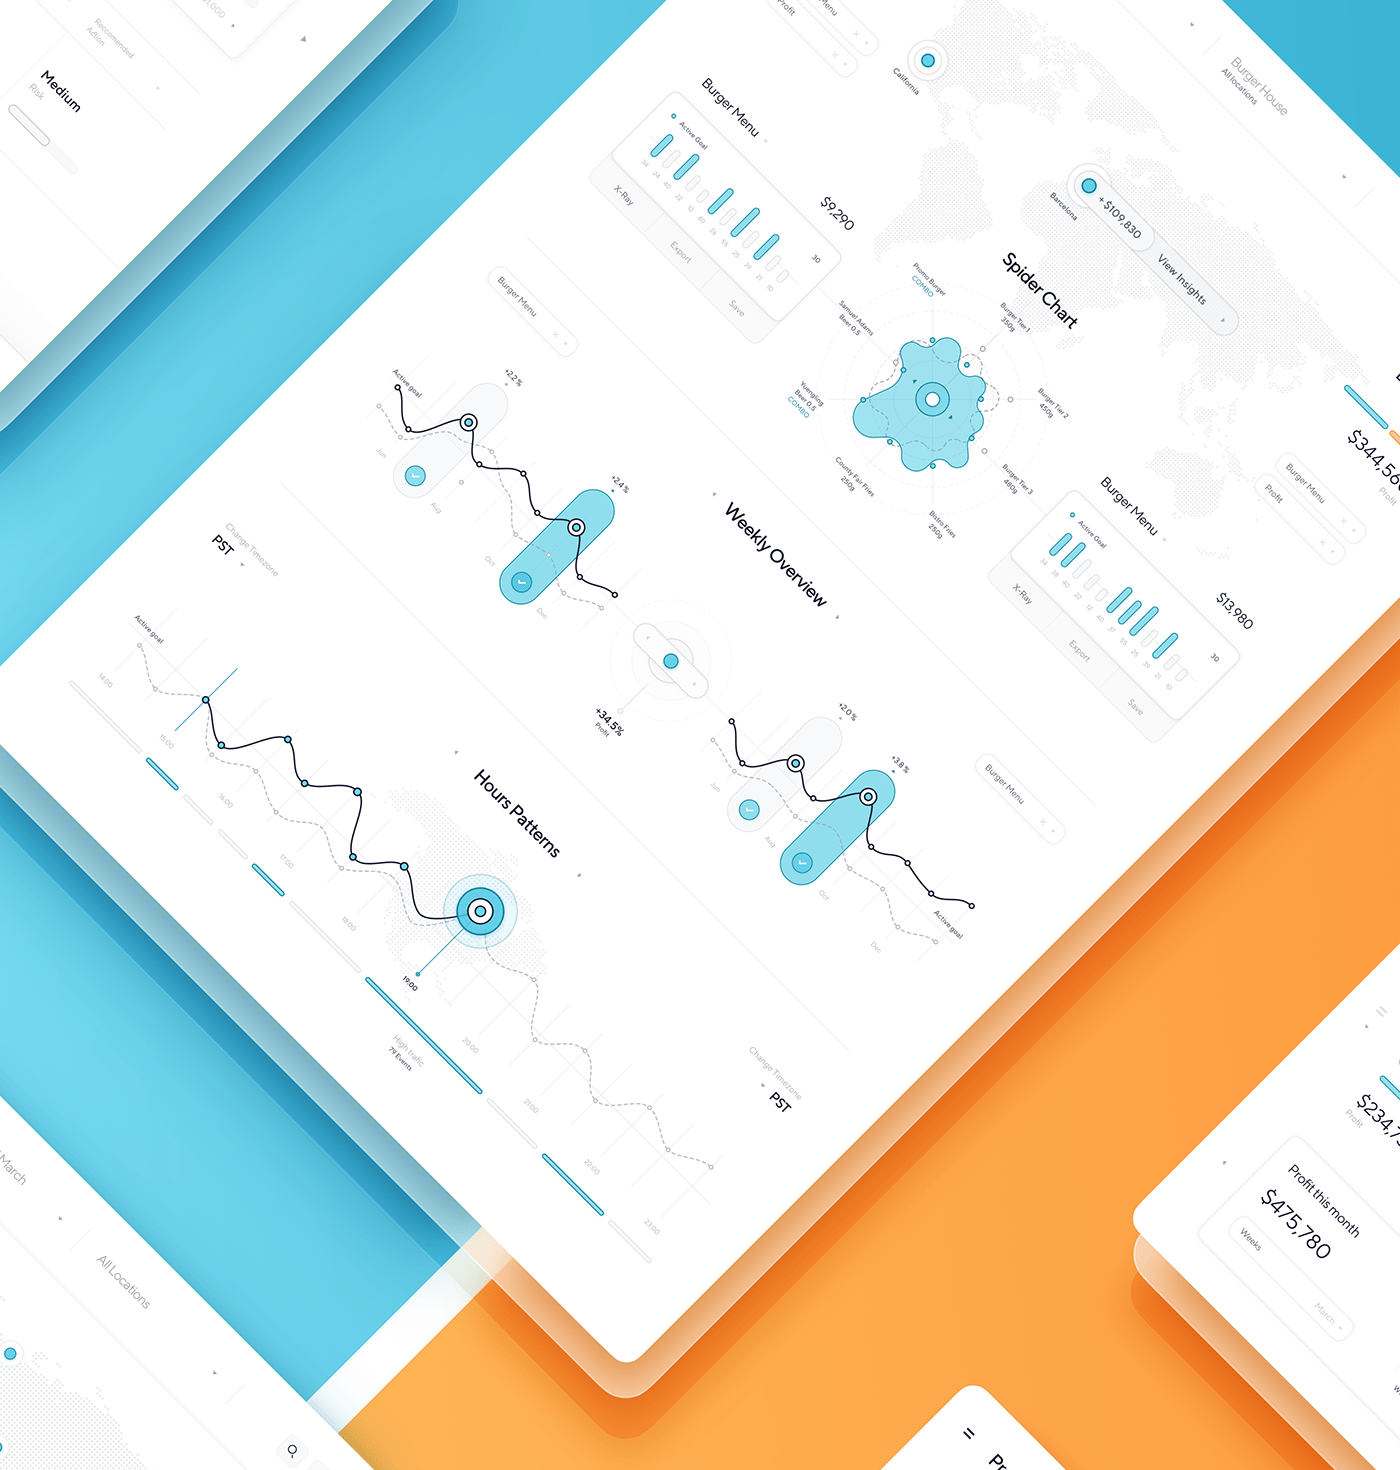 Dtail Design System - liberty to evolve UI and UX design alongside business goals.  - Dtail Studio